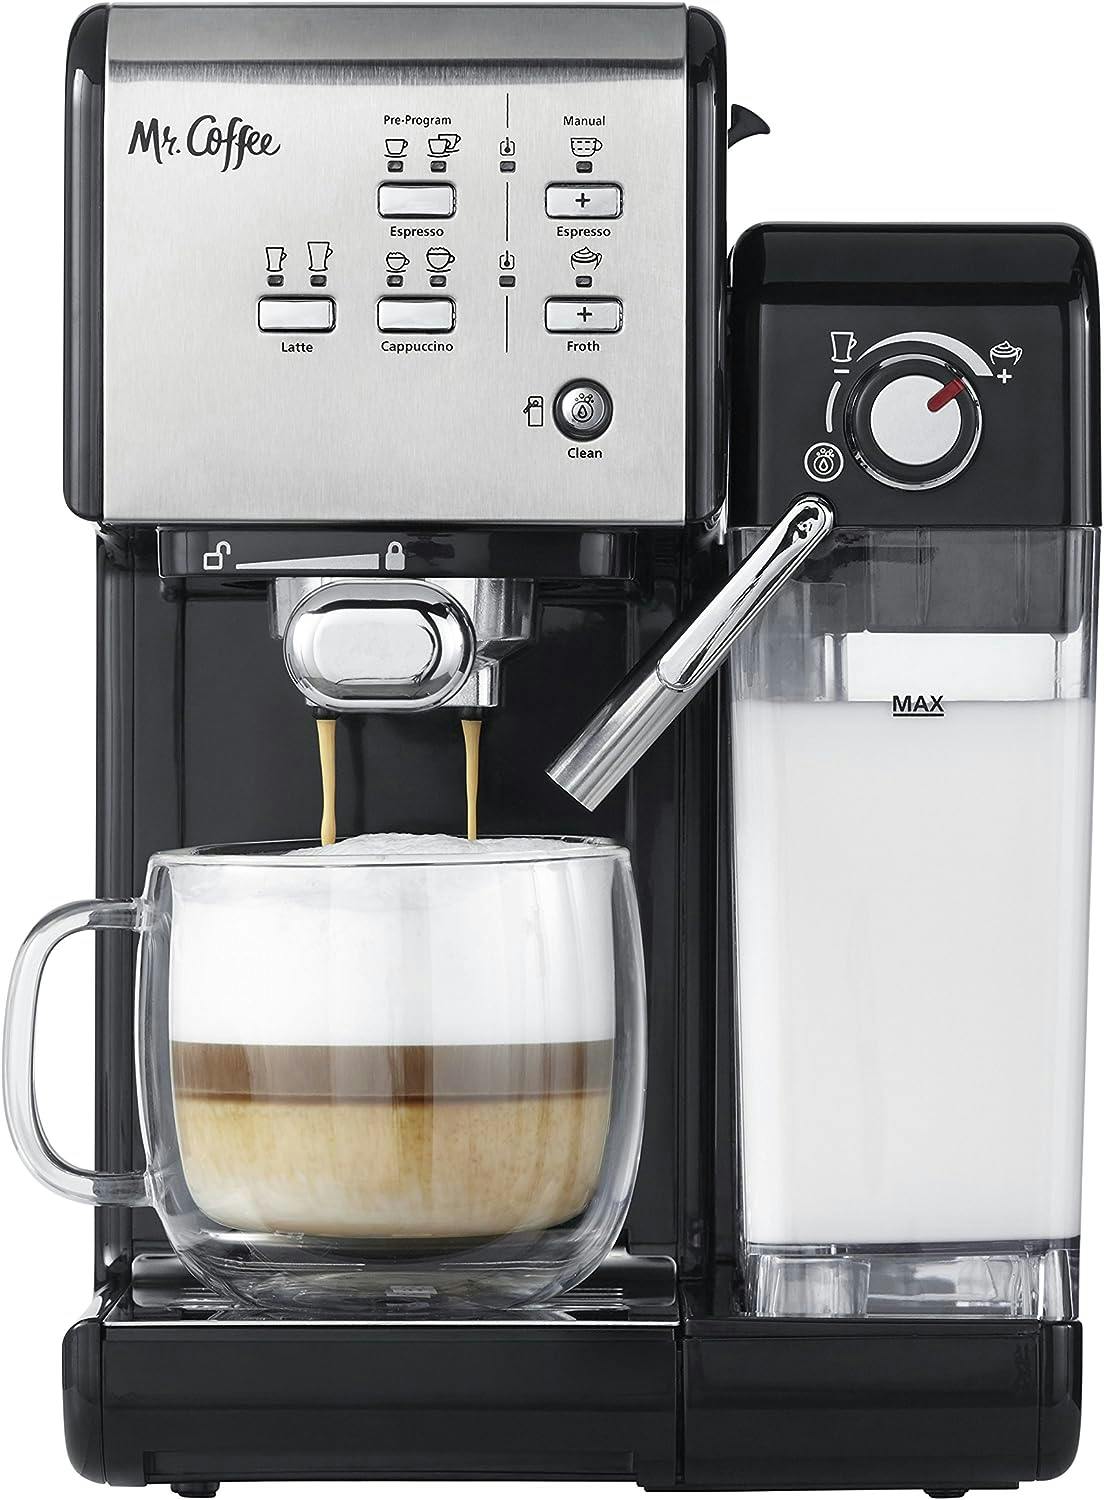 Stainless Steel 19-Bar Espresso and Cappuccino Freestanding Coffee Machine